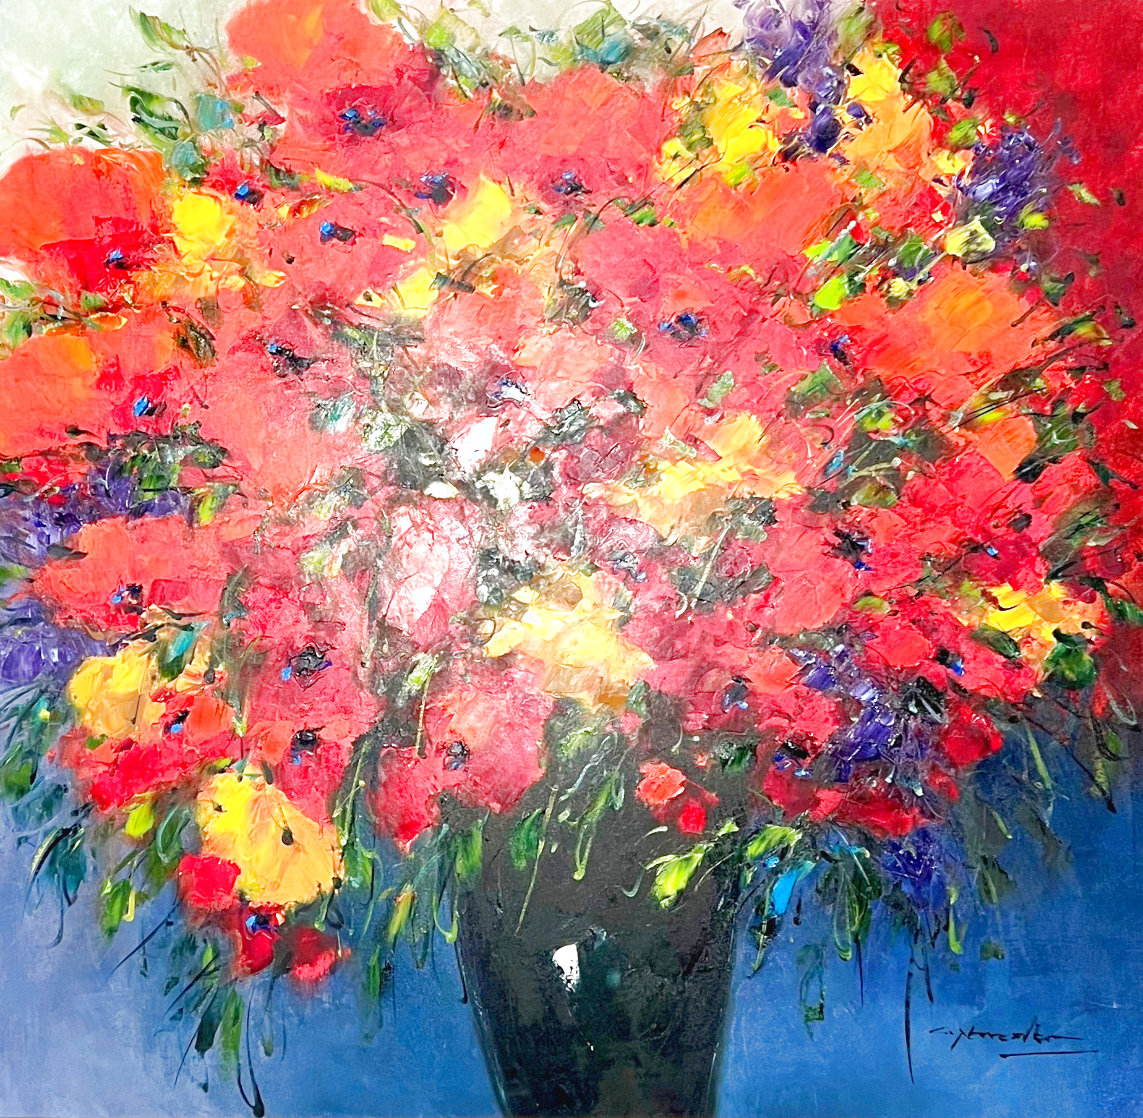 Untitled Floral 2005 45x45 - Huge Original Painting by Christian Nesvadba